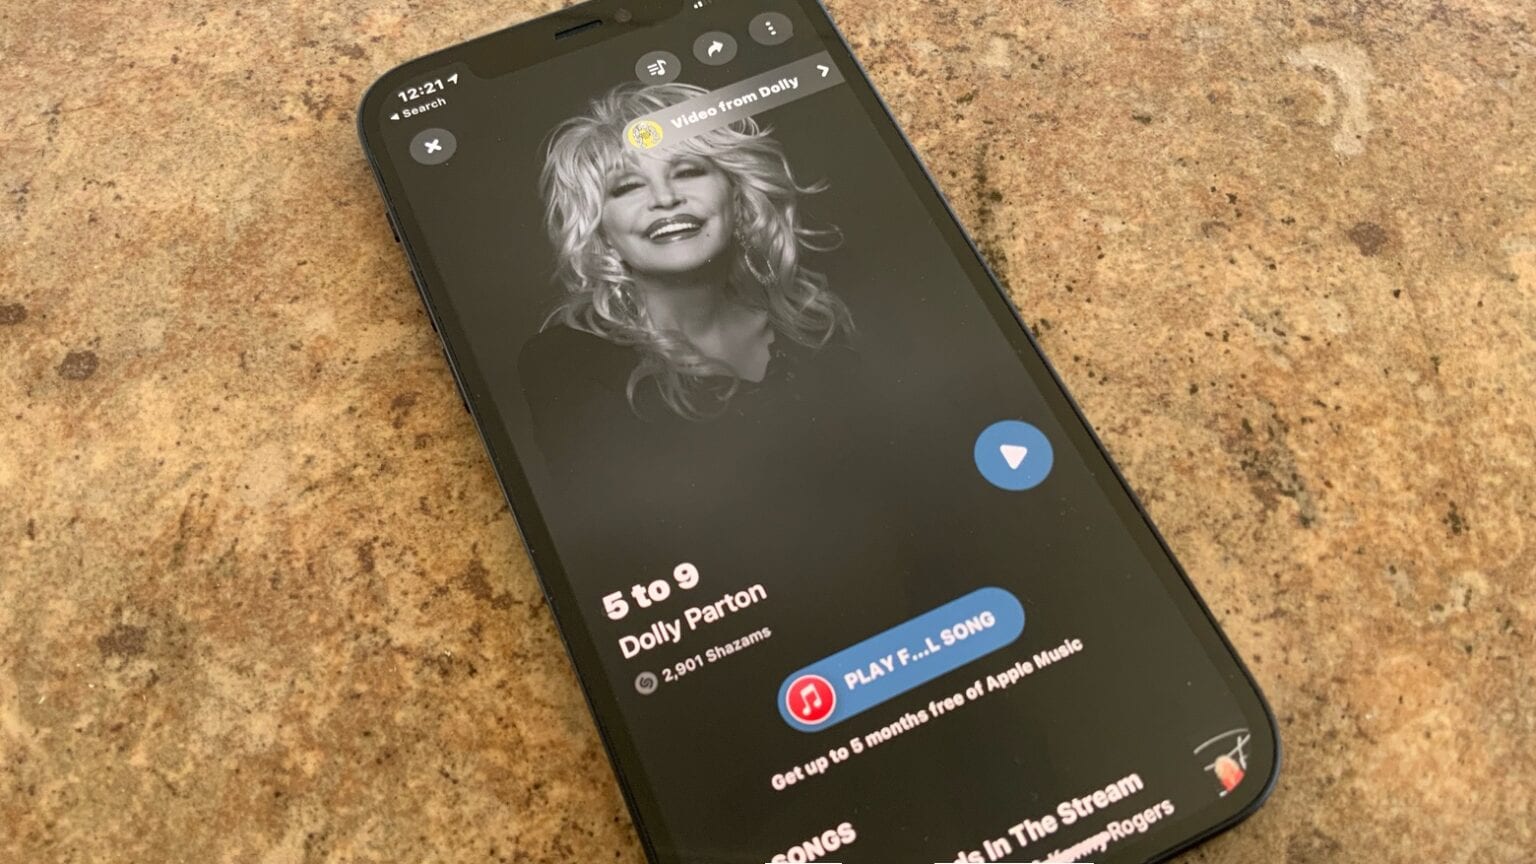 Listen to Dolly Parton in ‘5 to 9’ for 5 free months of Apple Music.